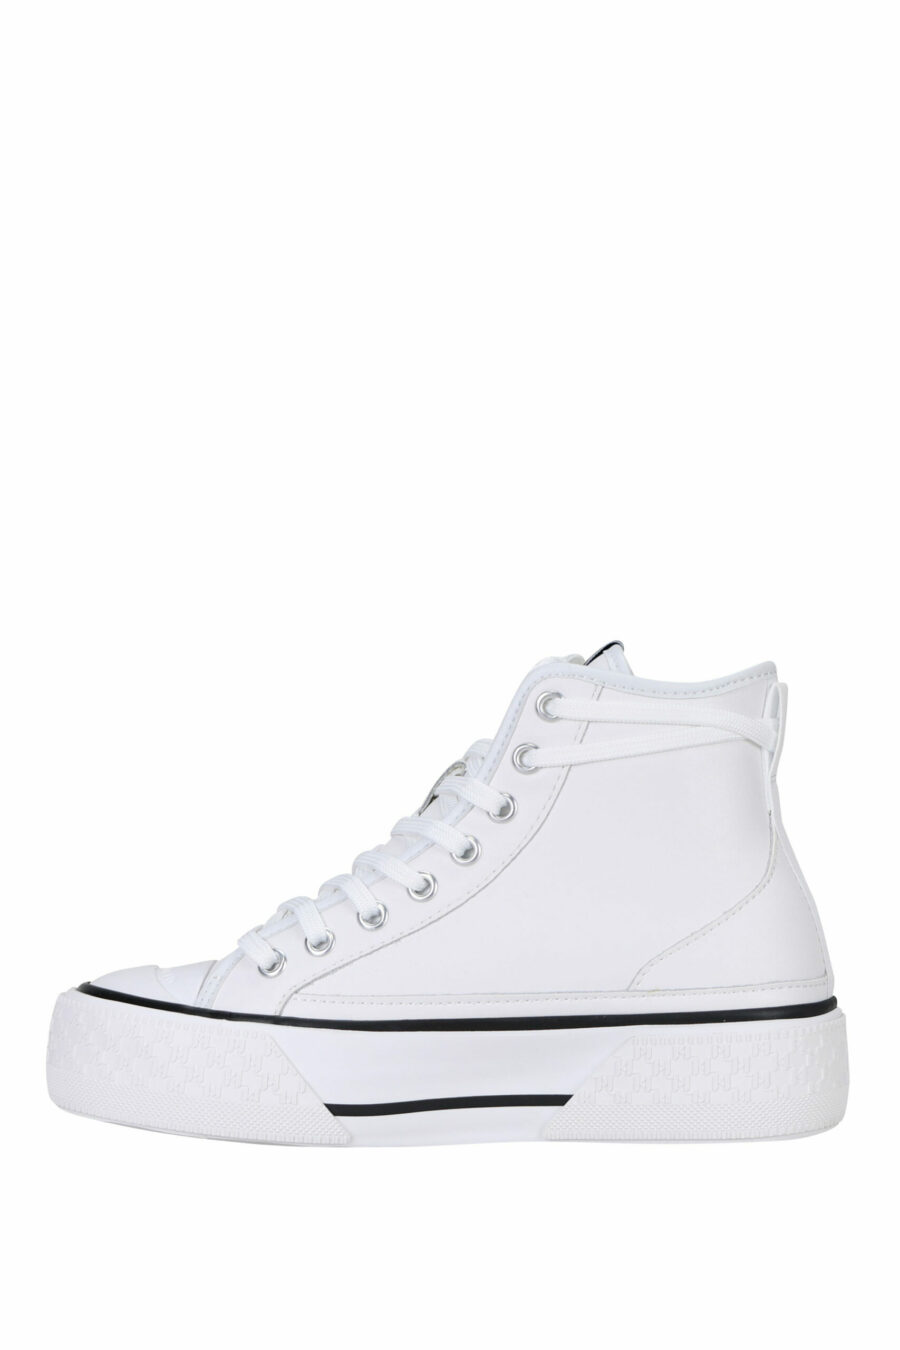 White leather high top trainers with white sole and "karl" logo - 5059529322974 2 scaled